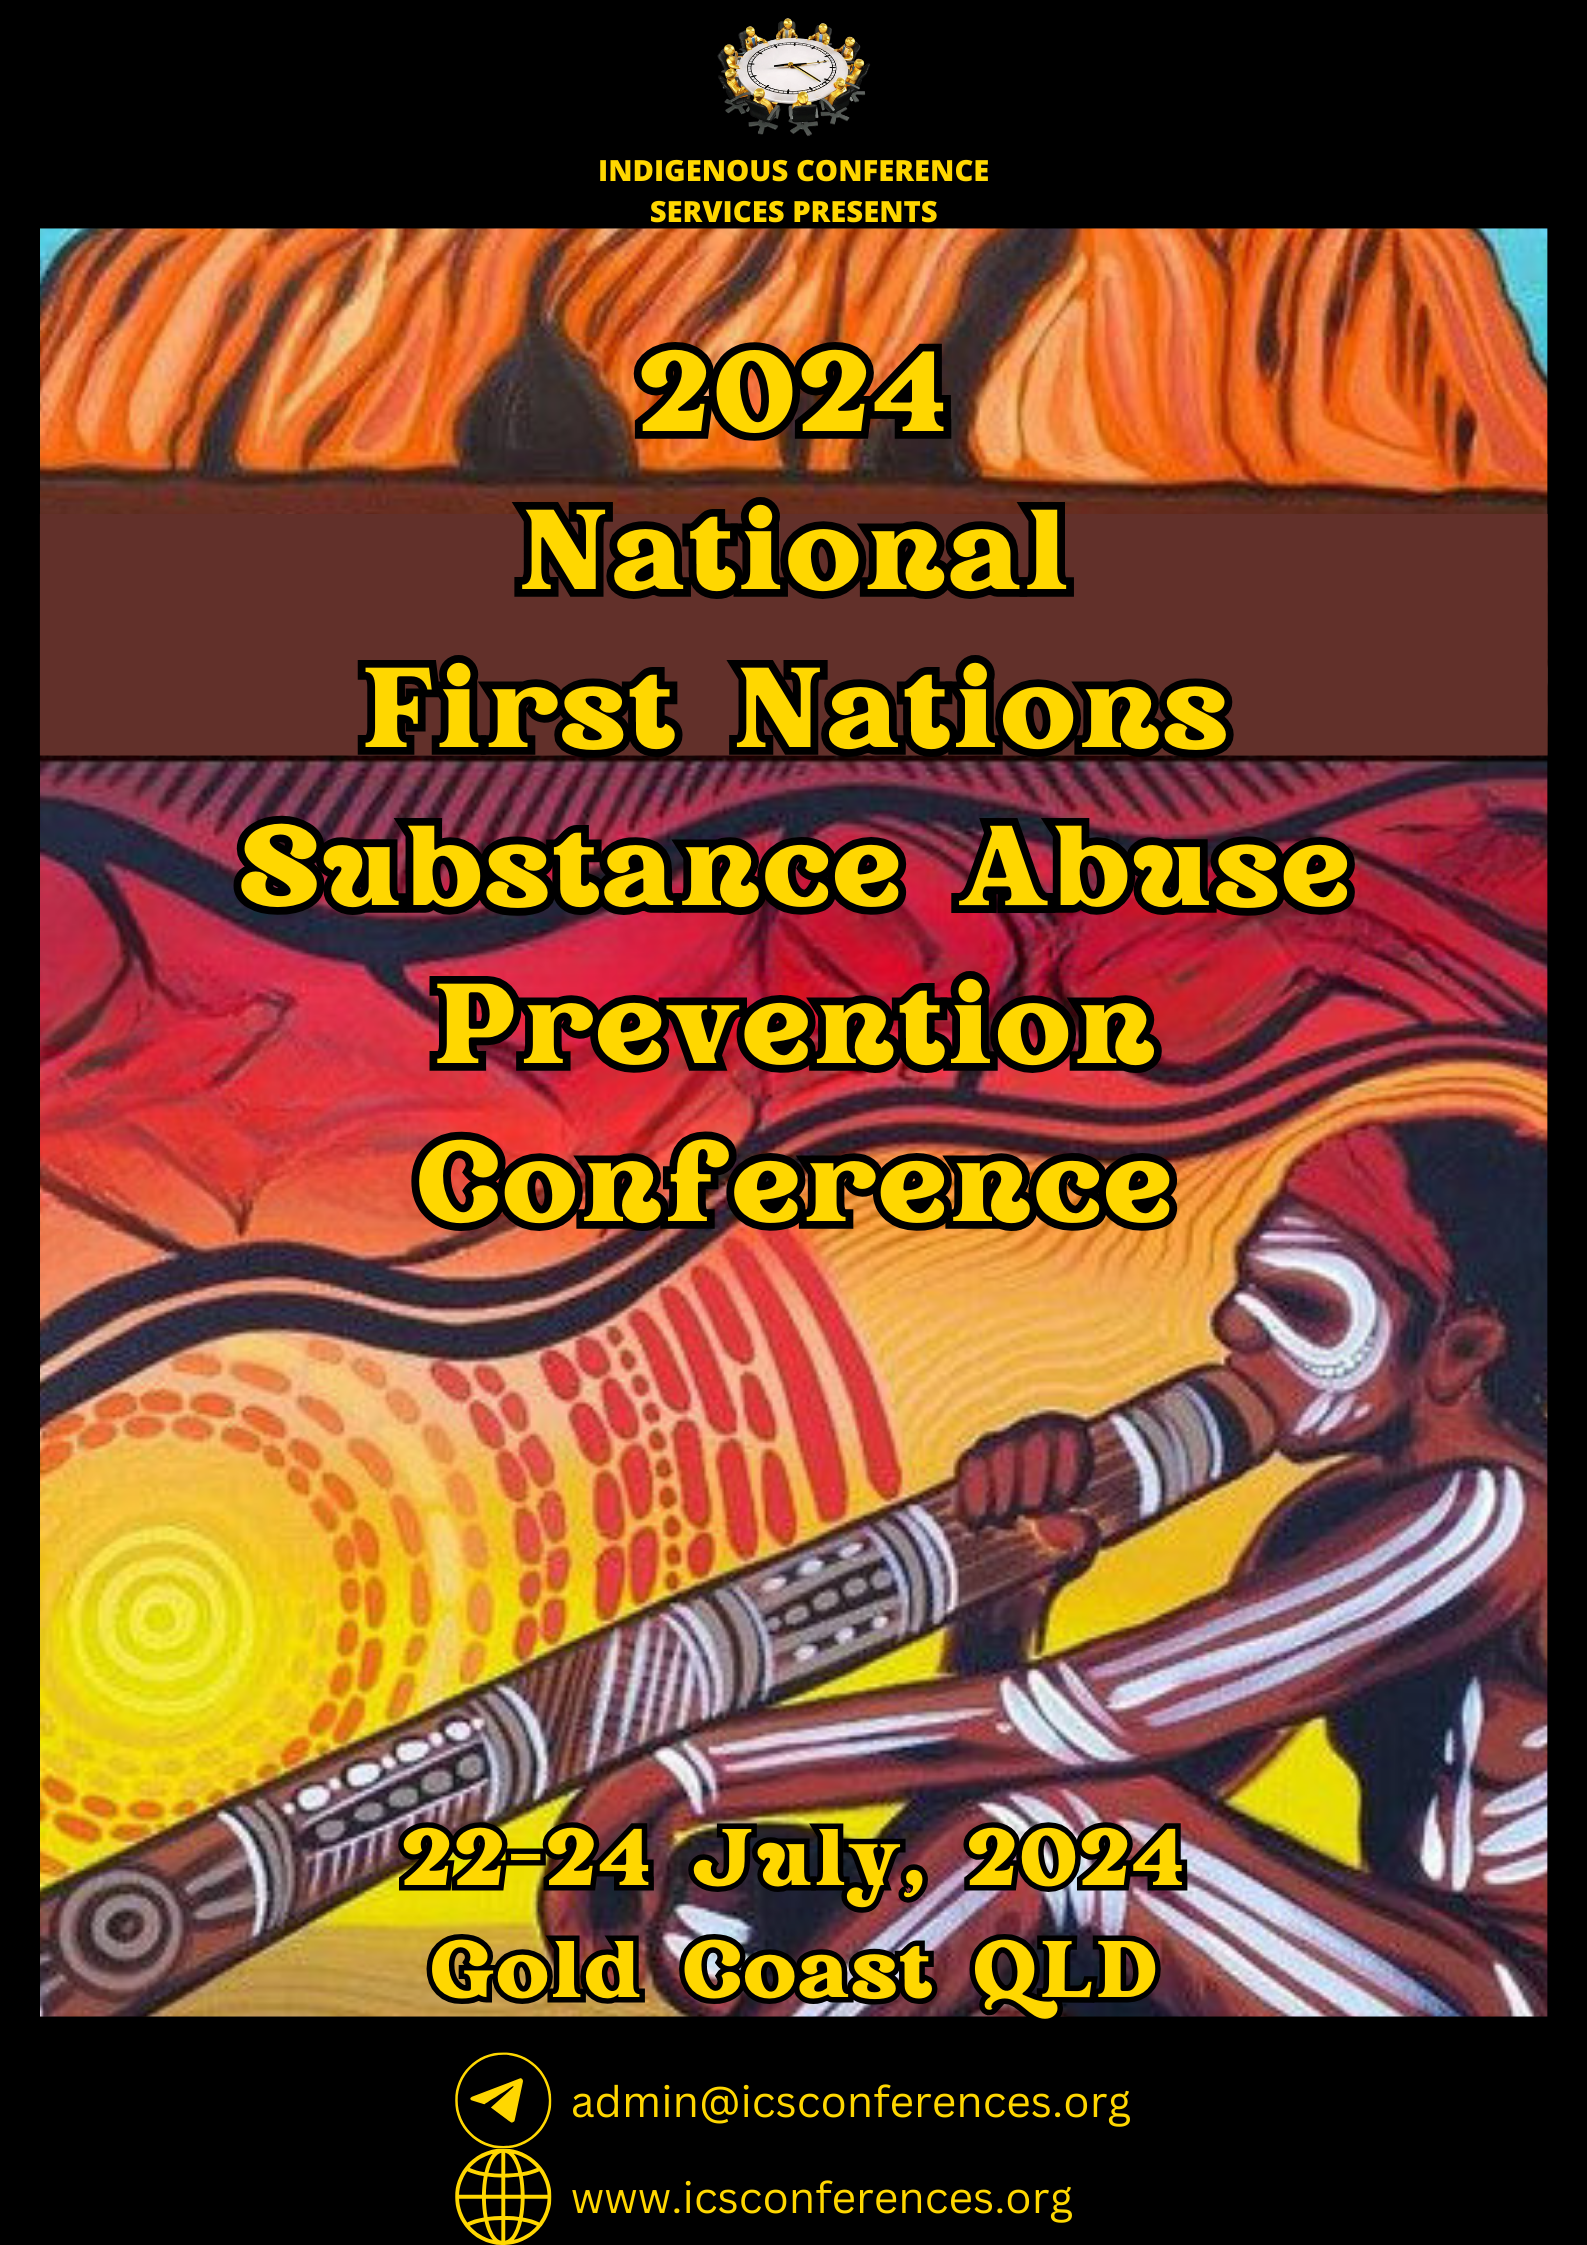 National First Nations Substance Abuse Prevention Conference